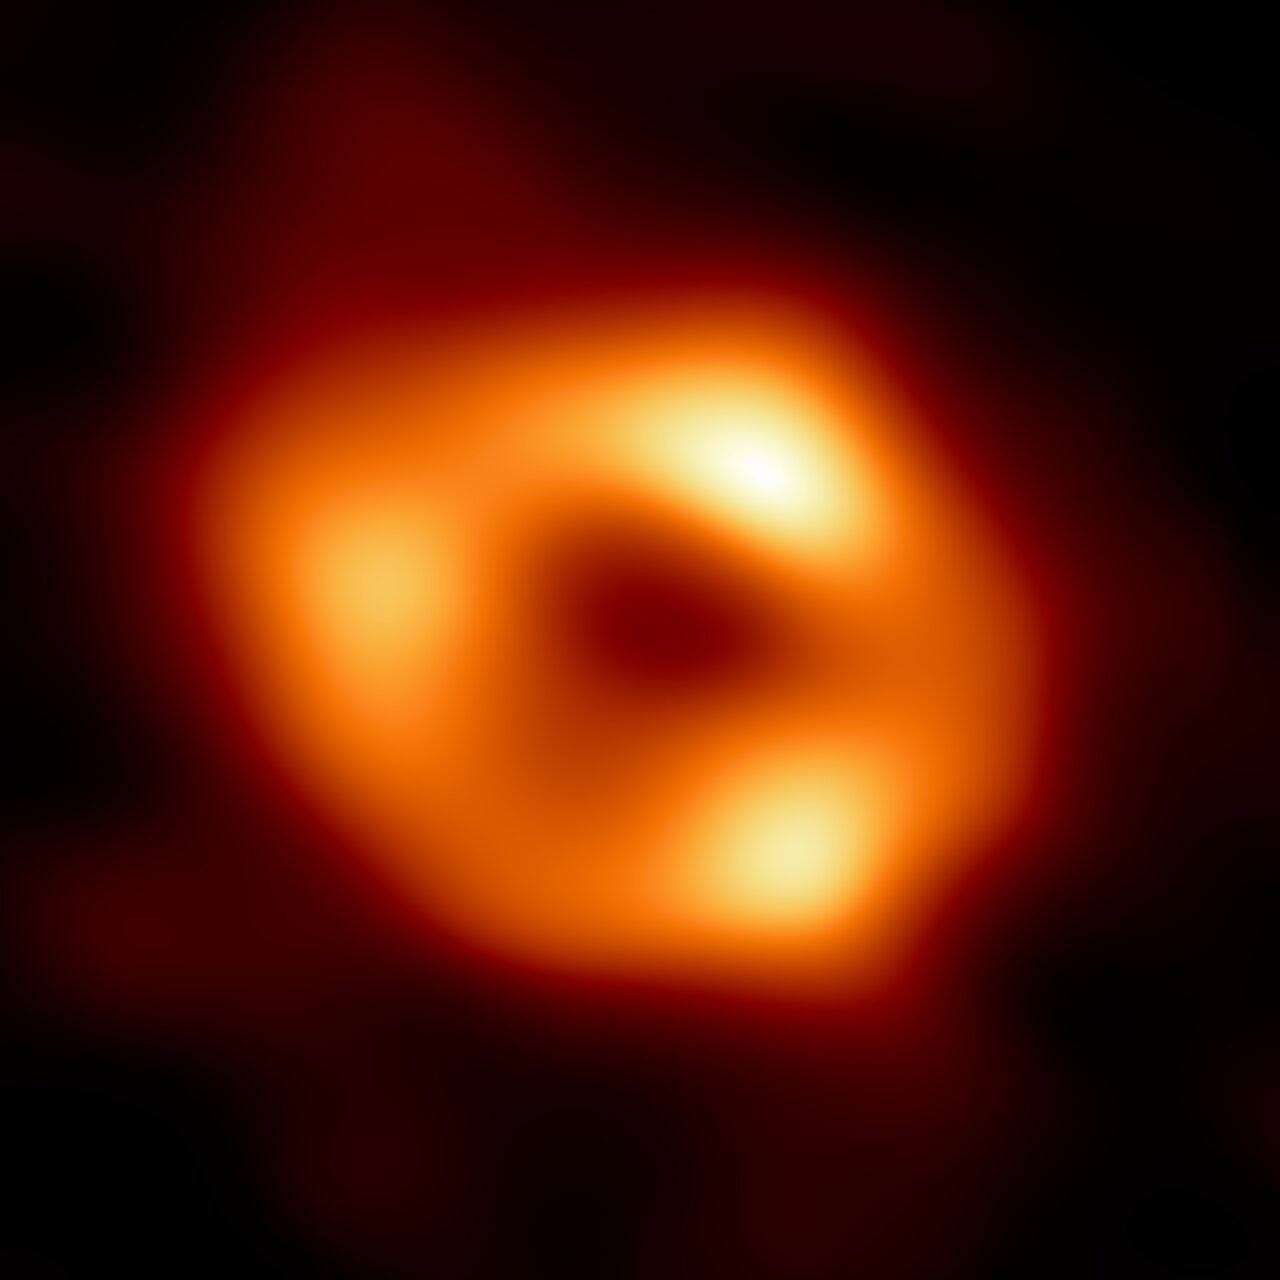 Photo of Sagittarius A*, the black hole at the center of the Milky Way. 